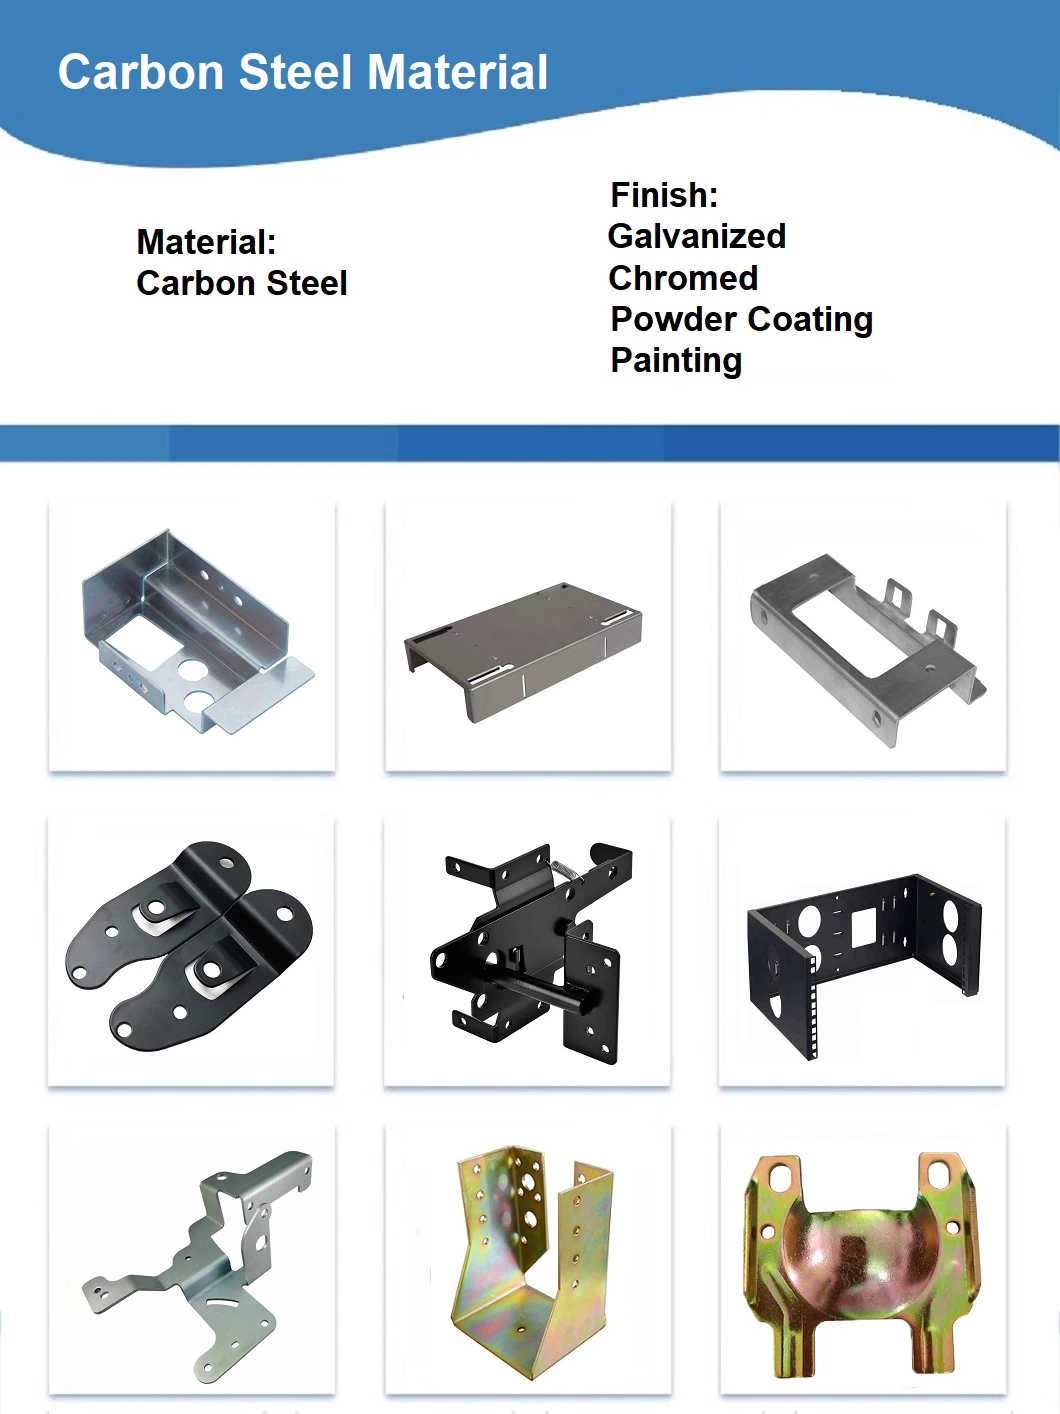 Customize Precision Auto Agriculture Sheet Metal Press Punching CNC Machining Stamping Parts